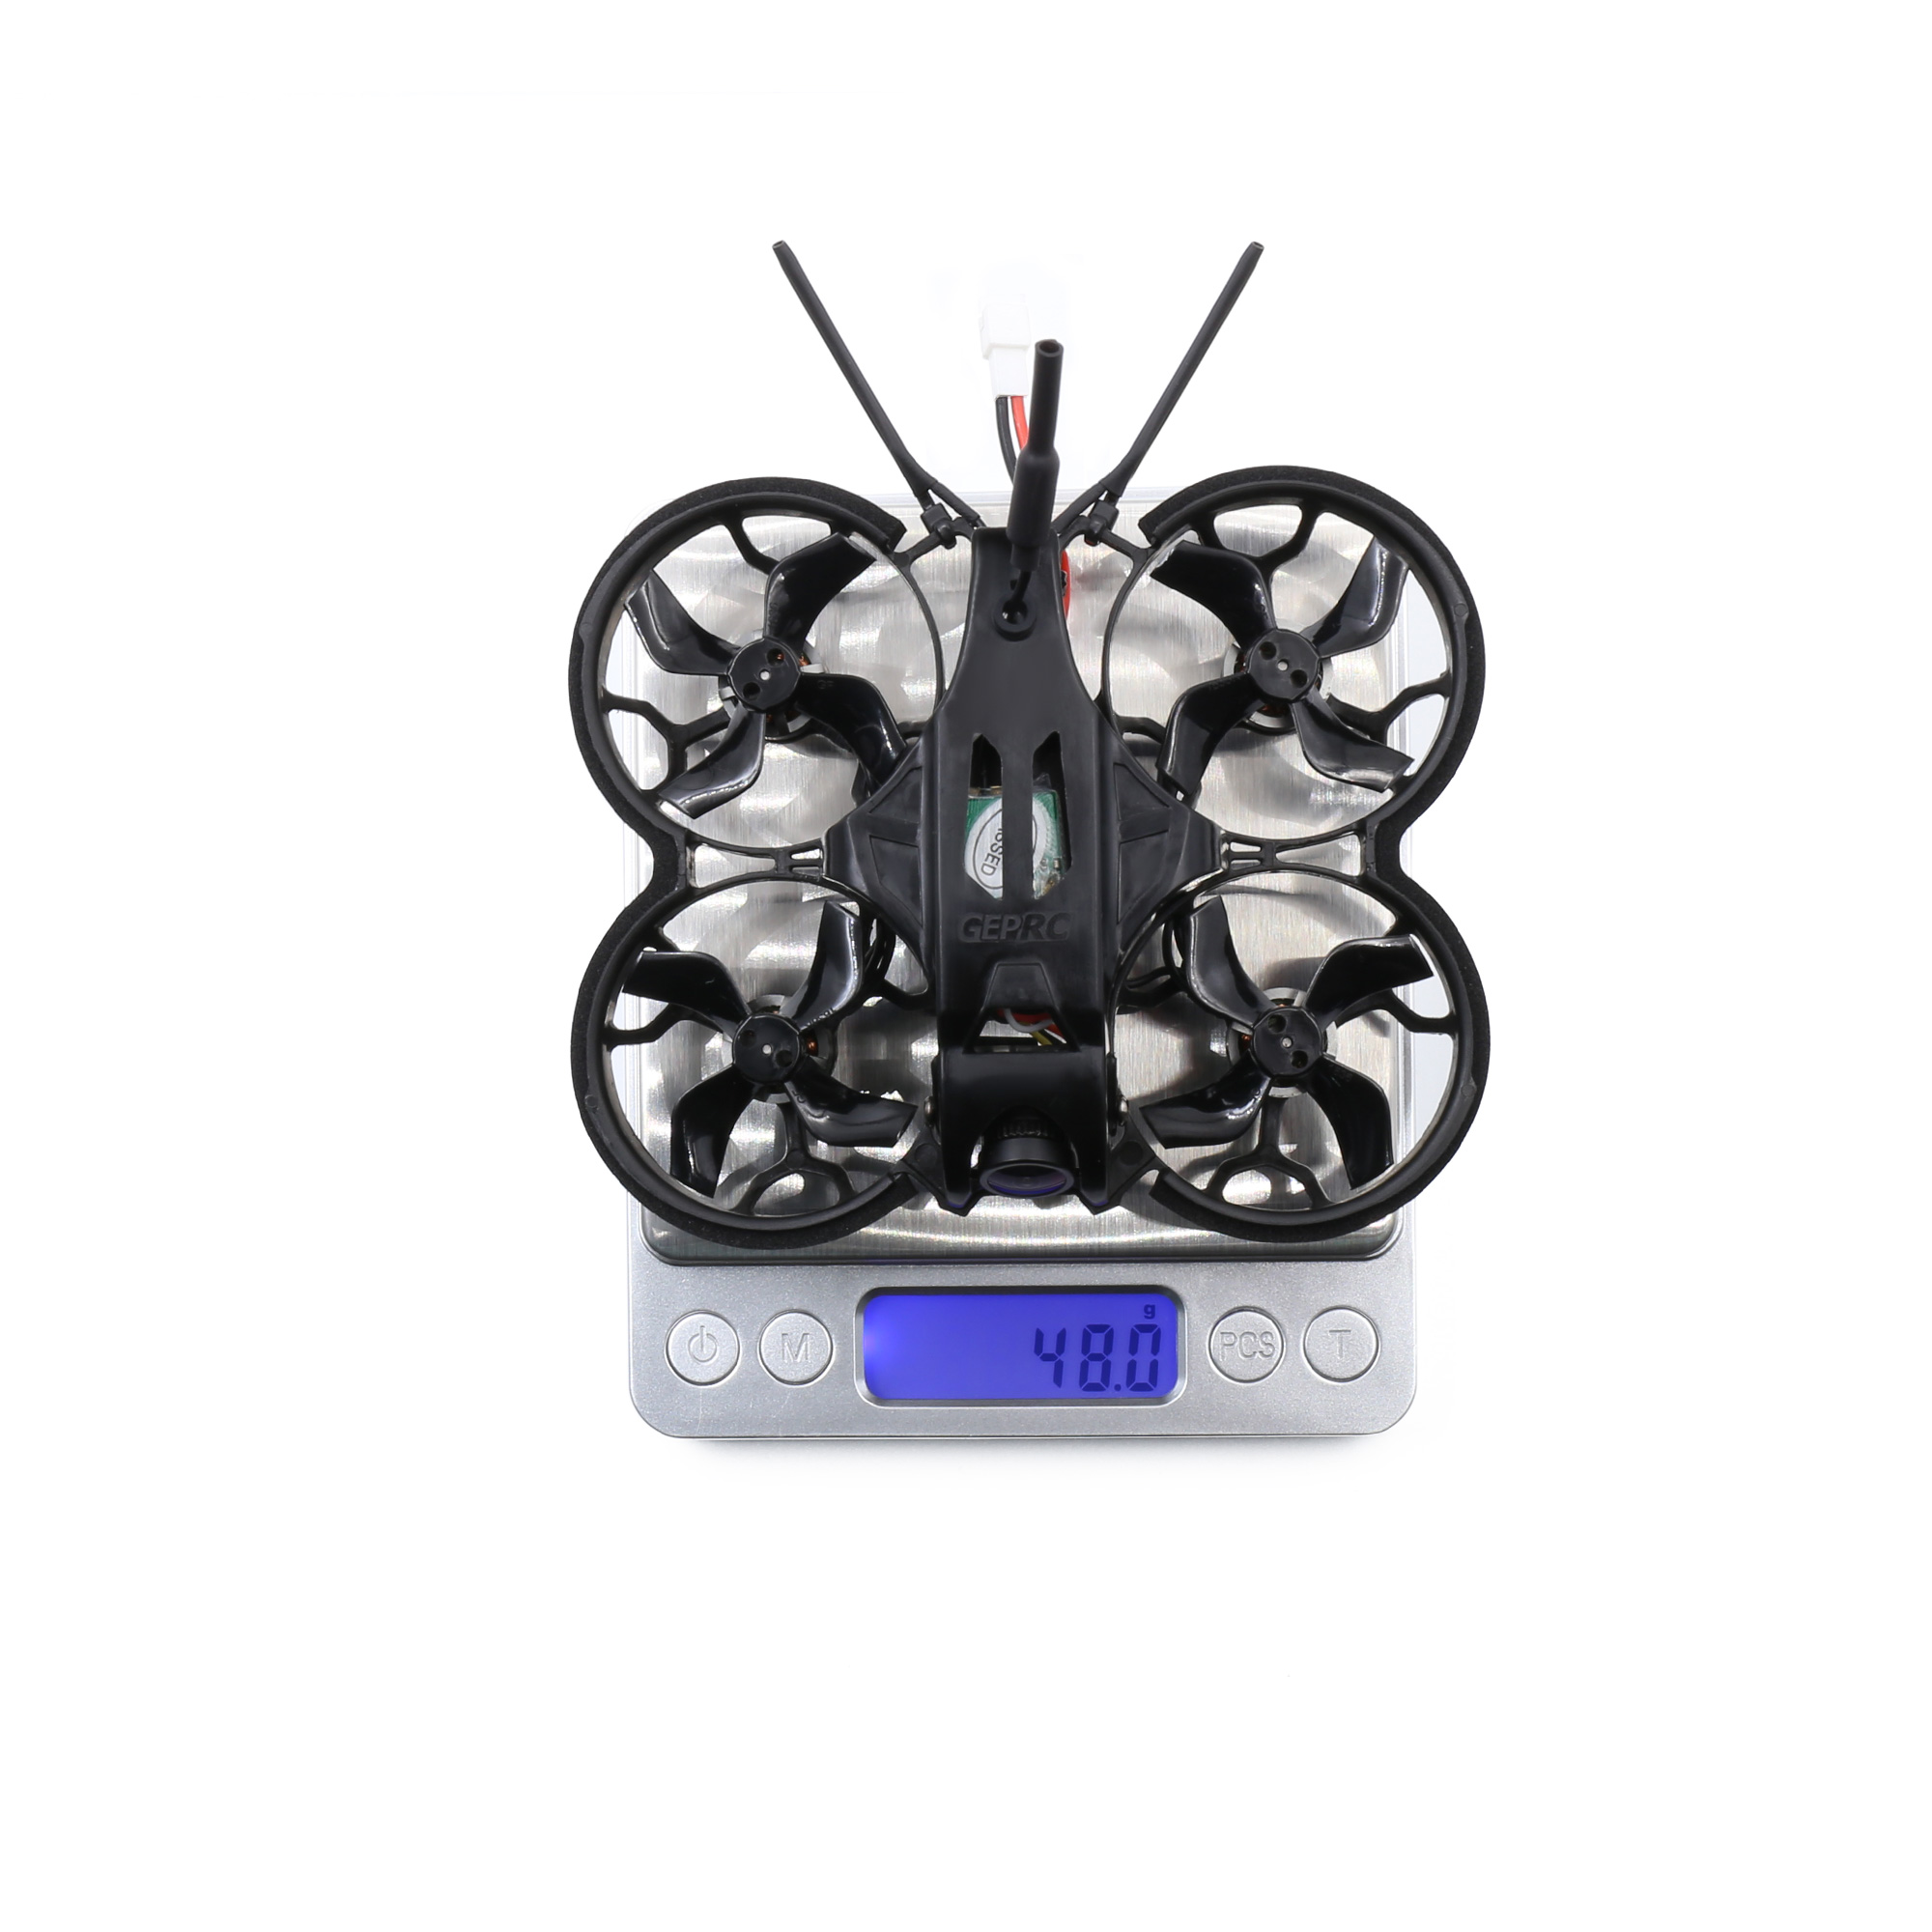 GEPRC-TinyGO-16inch-2S-FPV-Indoor-Whoop-Runcam-Nano2-GR8-Remote-ControllerRG1-Goggles-RTF-Ready-To-F-1788771-10